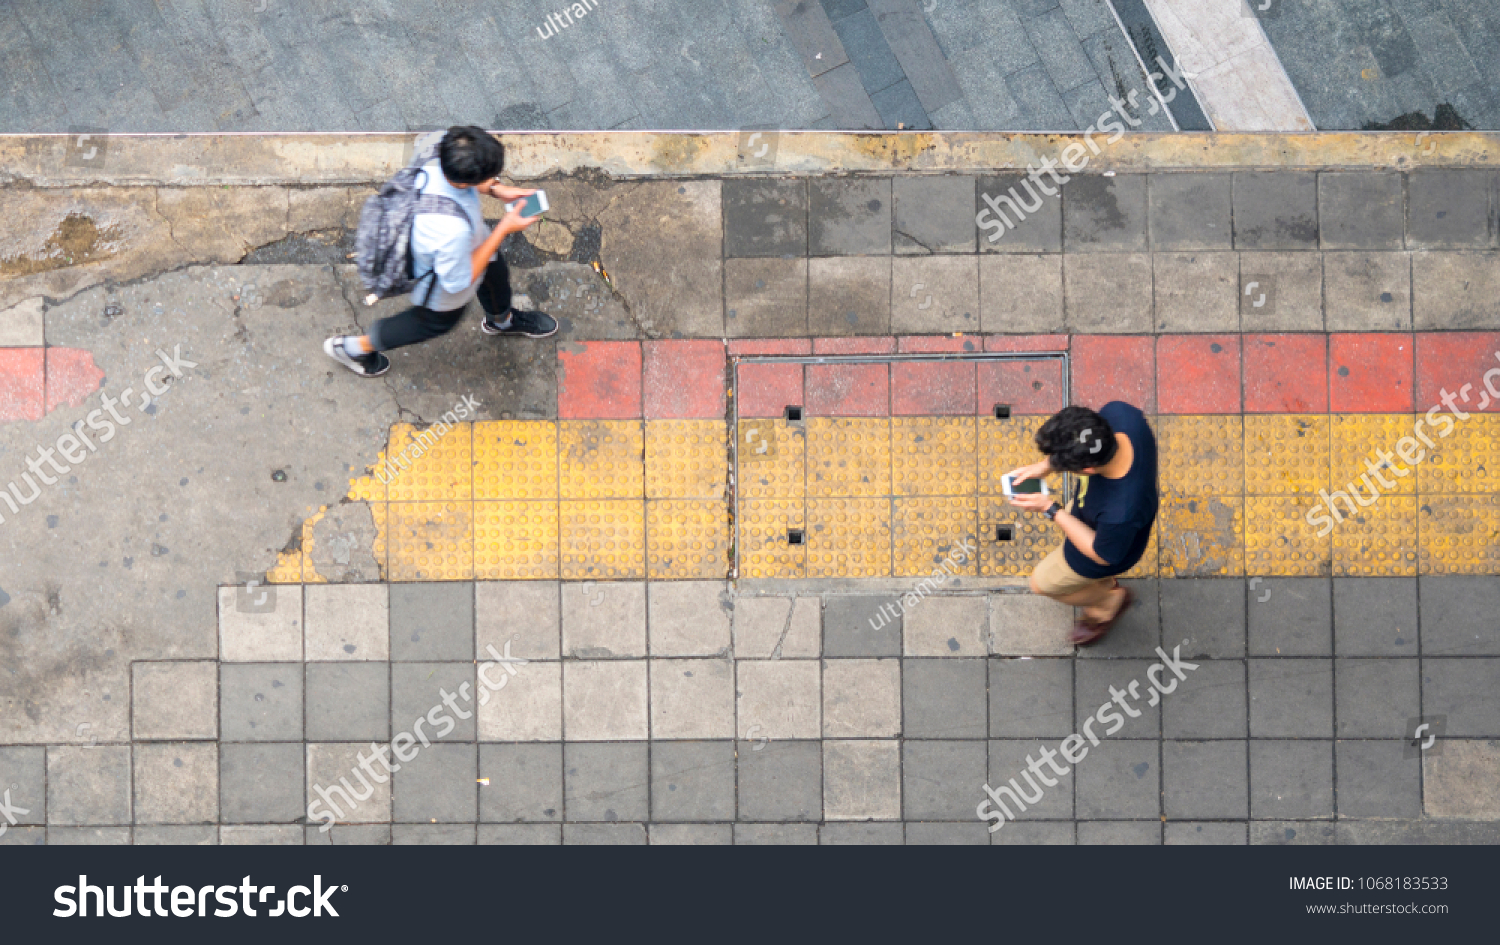 Aerial view and top view with blur man with smartphone is walking in business area with pedestrian street and red and yellow block walkway #1068183533